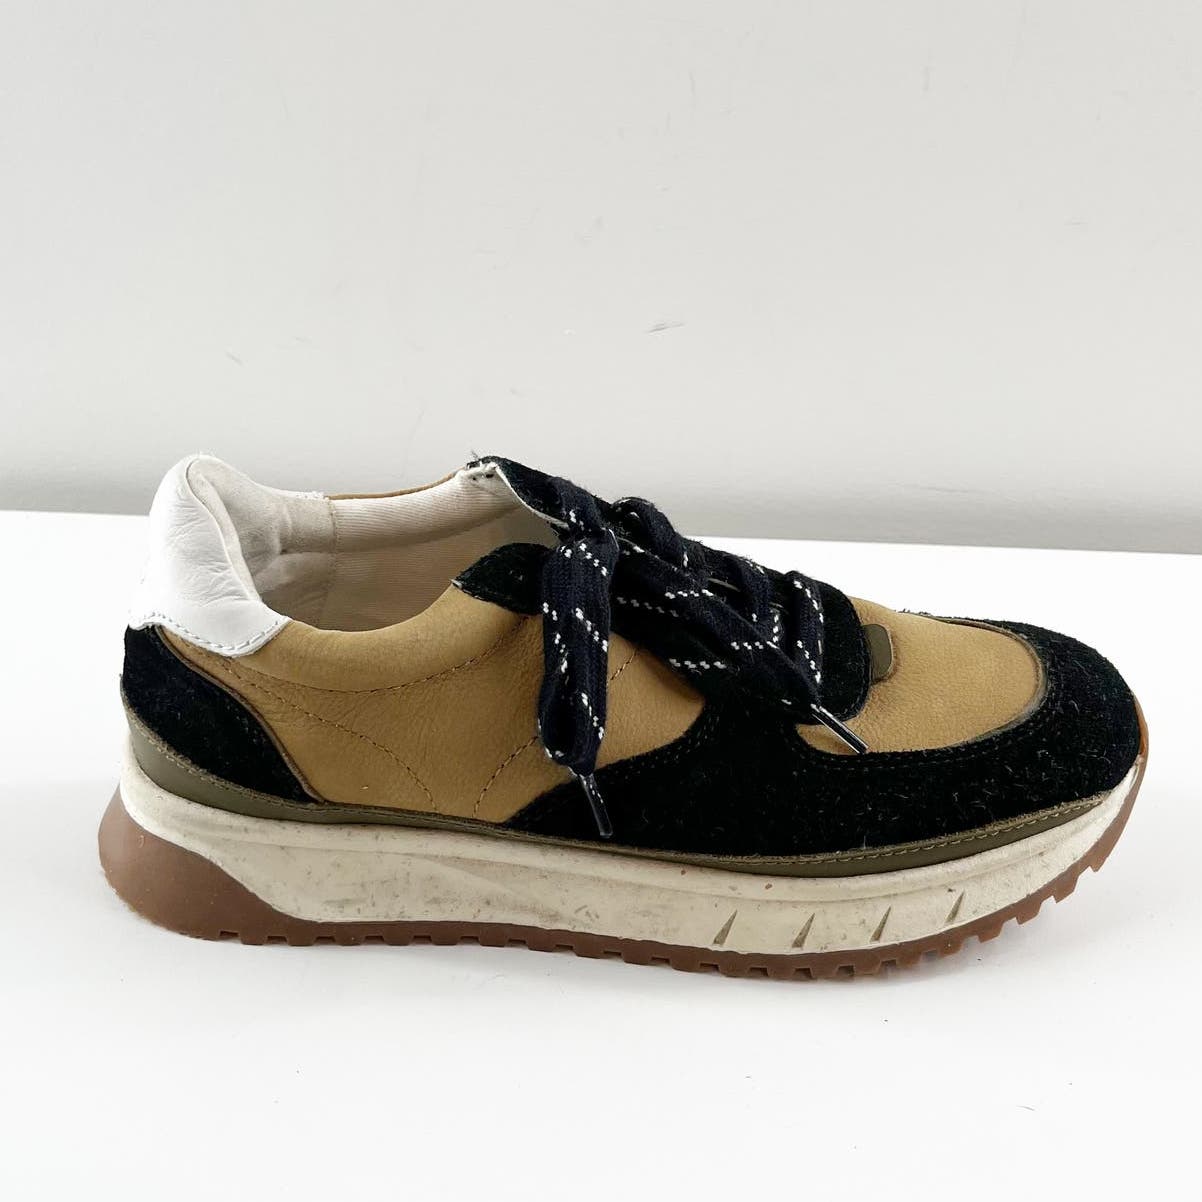 Madewell Kickoff Trainer Sneakers in Nubuck Suede Leather Tan Black 7.5